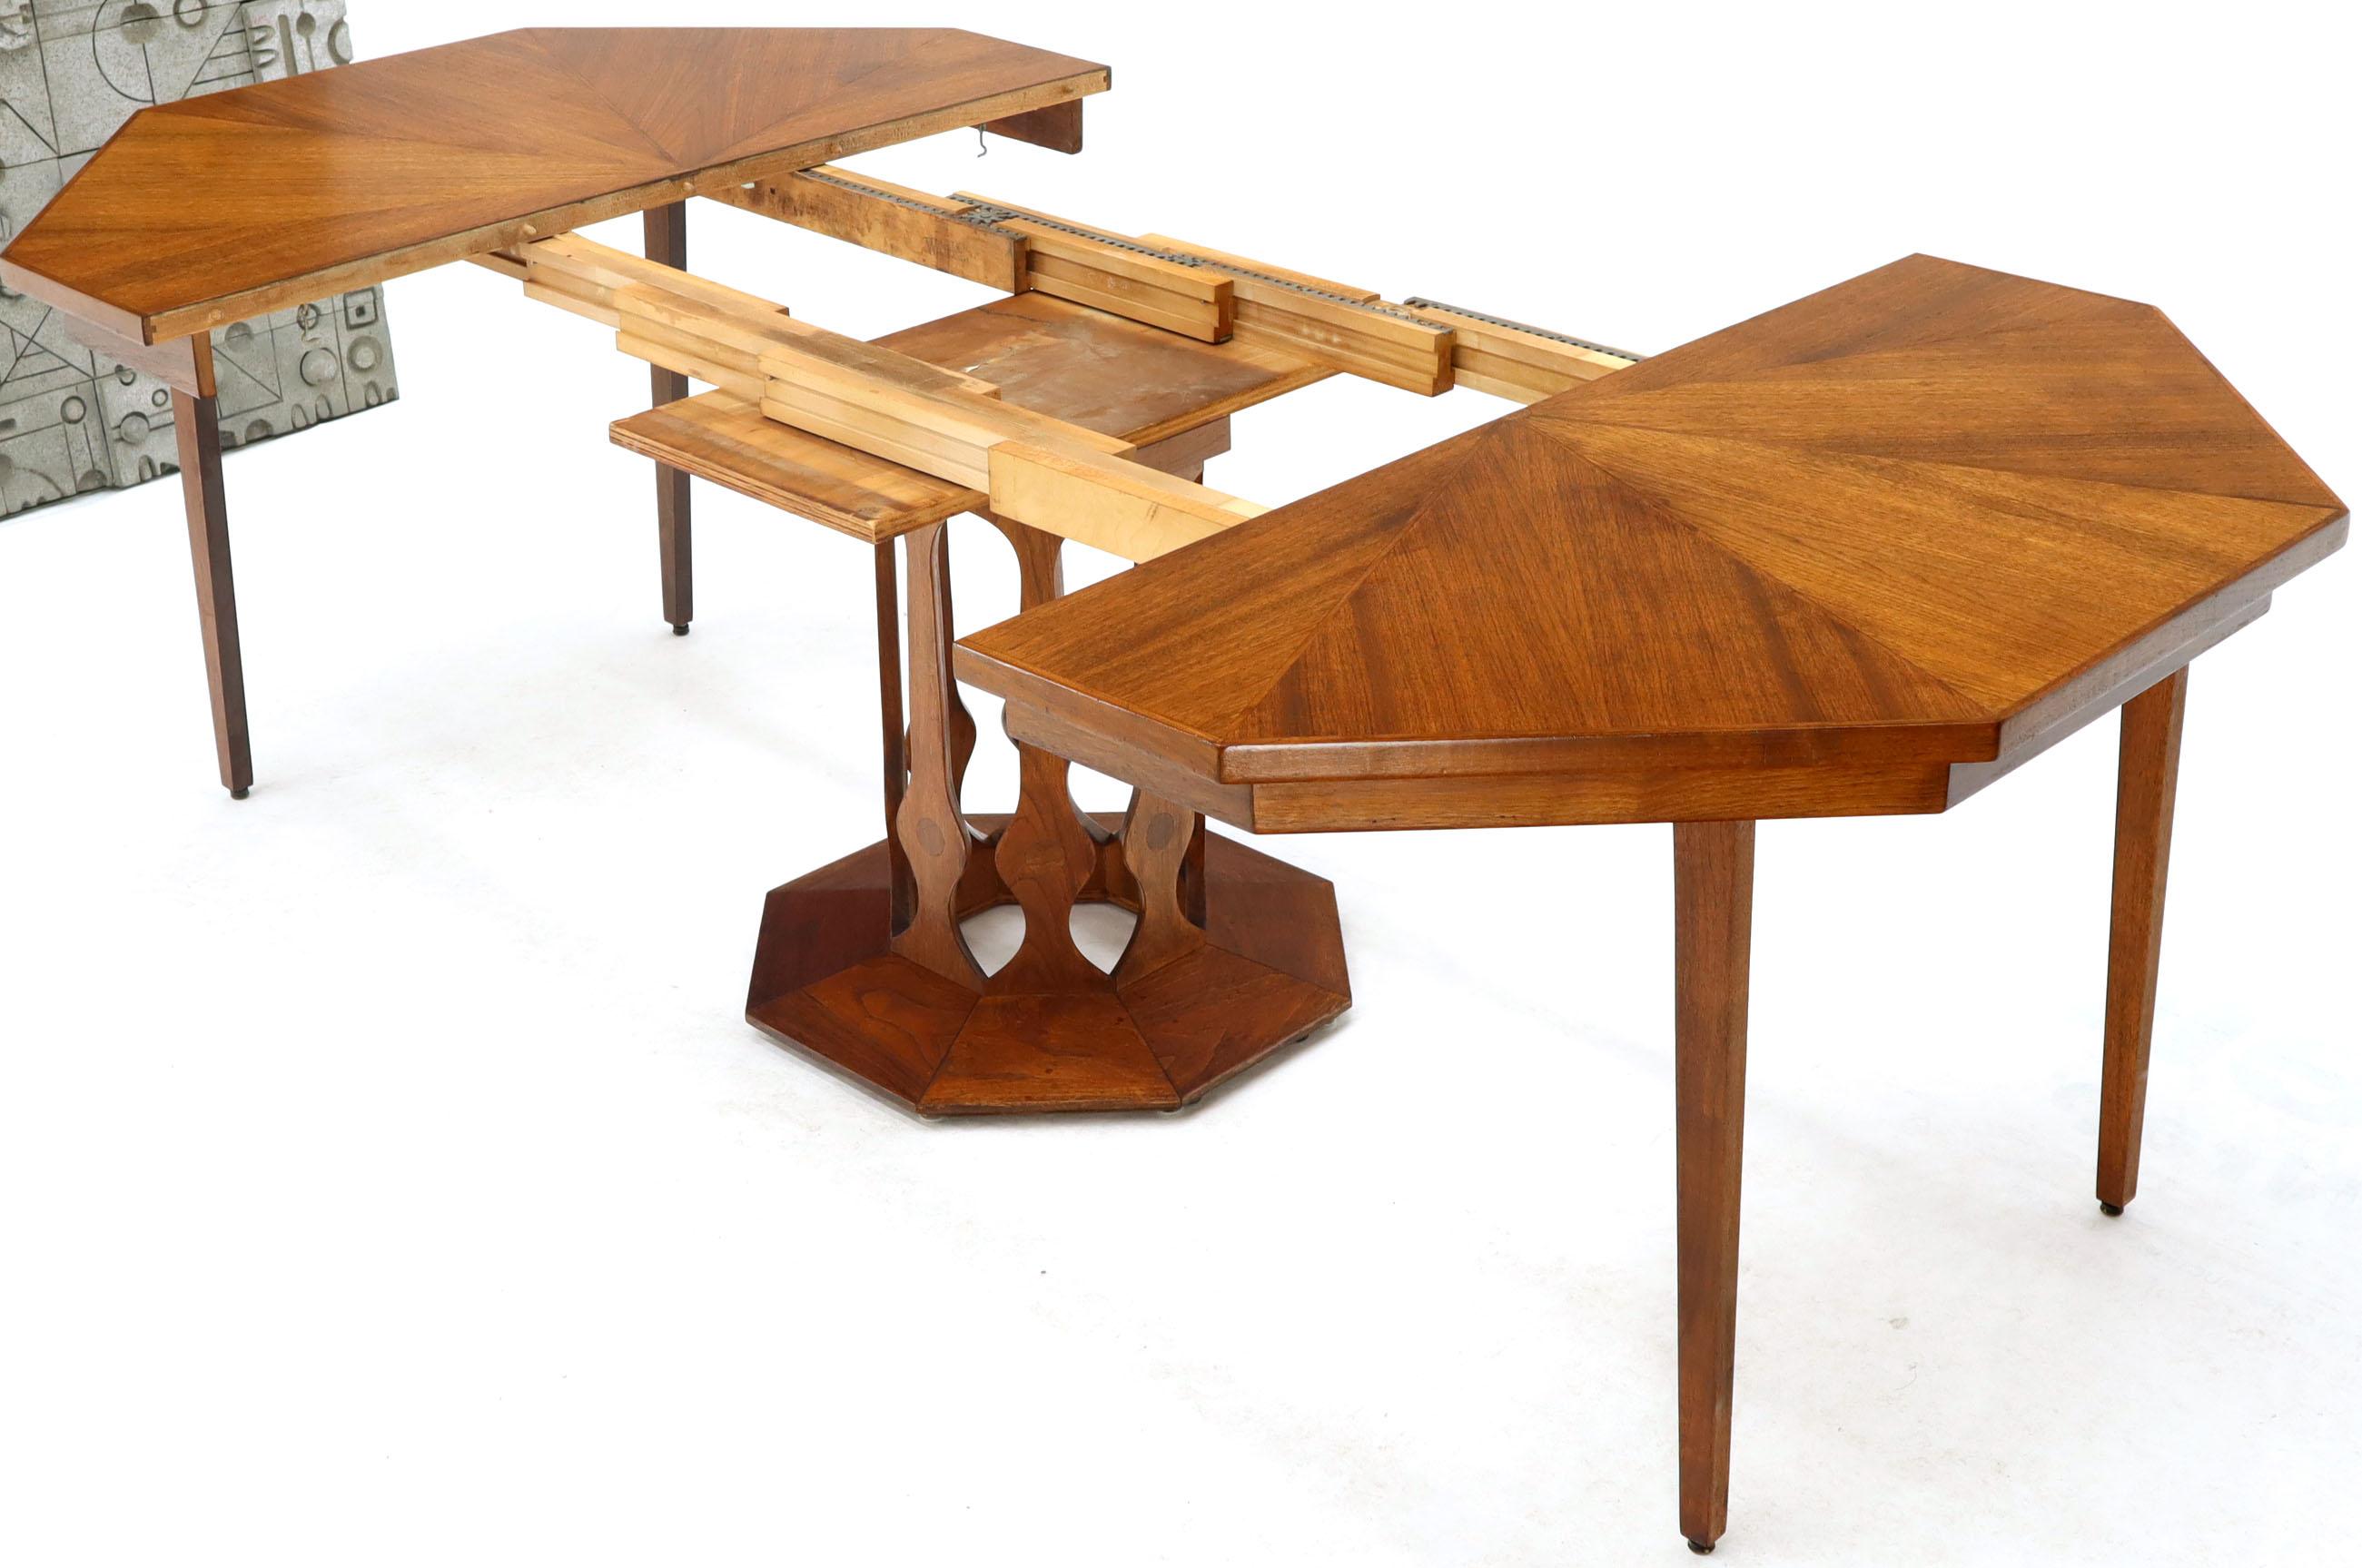 Mid-Century Modern single pedestal oiled walnut dining centre table of Harvey Probber influence. Includes two 16